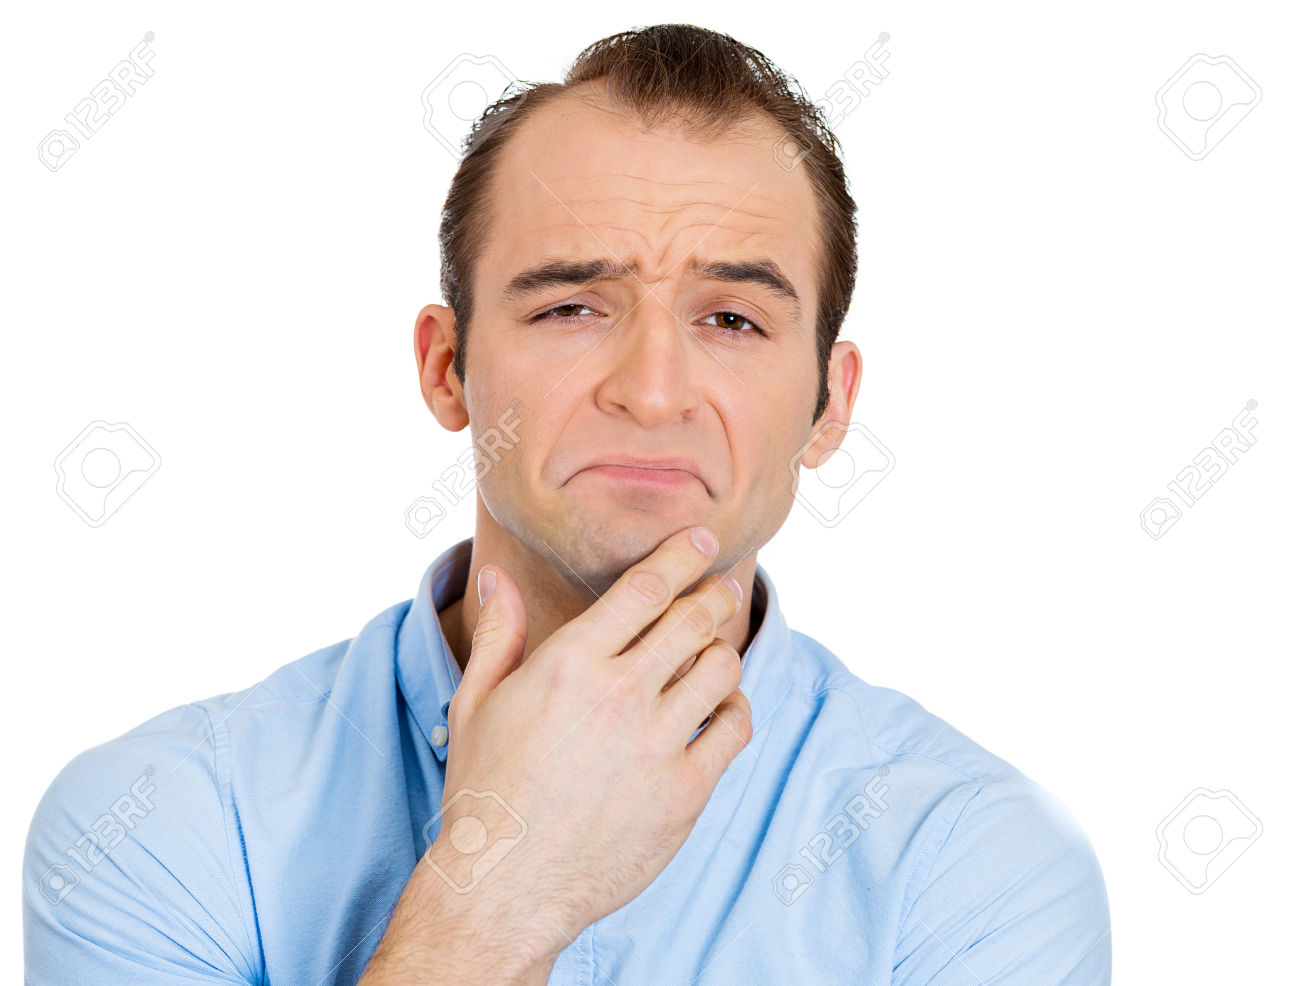 Closeup portrait of skeptical guy, business man looking suspicious, assessing situation, face full of disapproval, isolated on white background. Negative human emotions, facial expressions, feelings